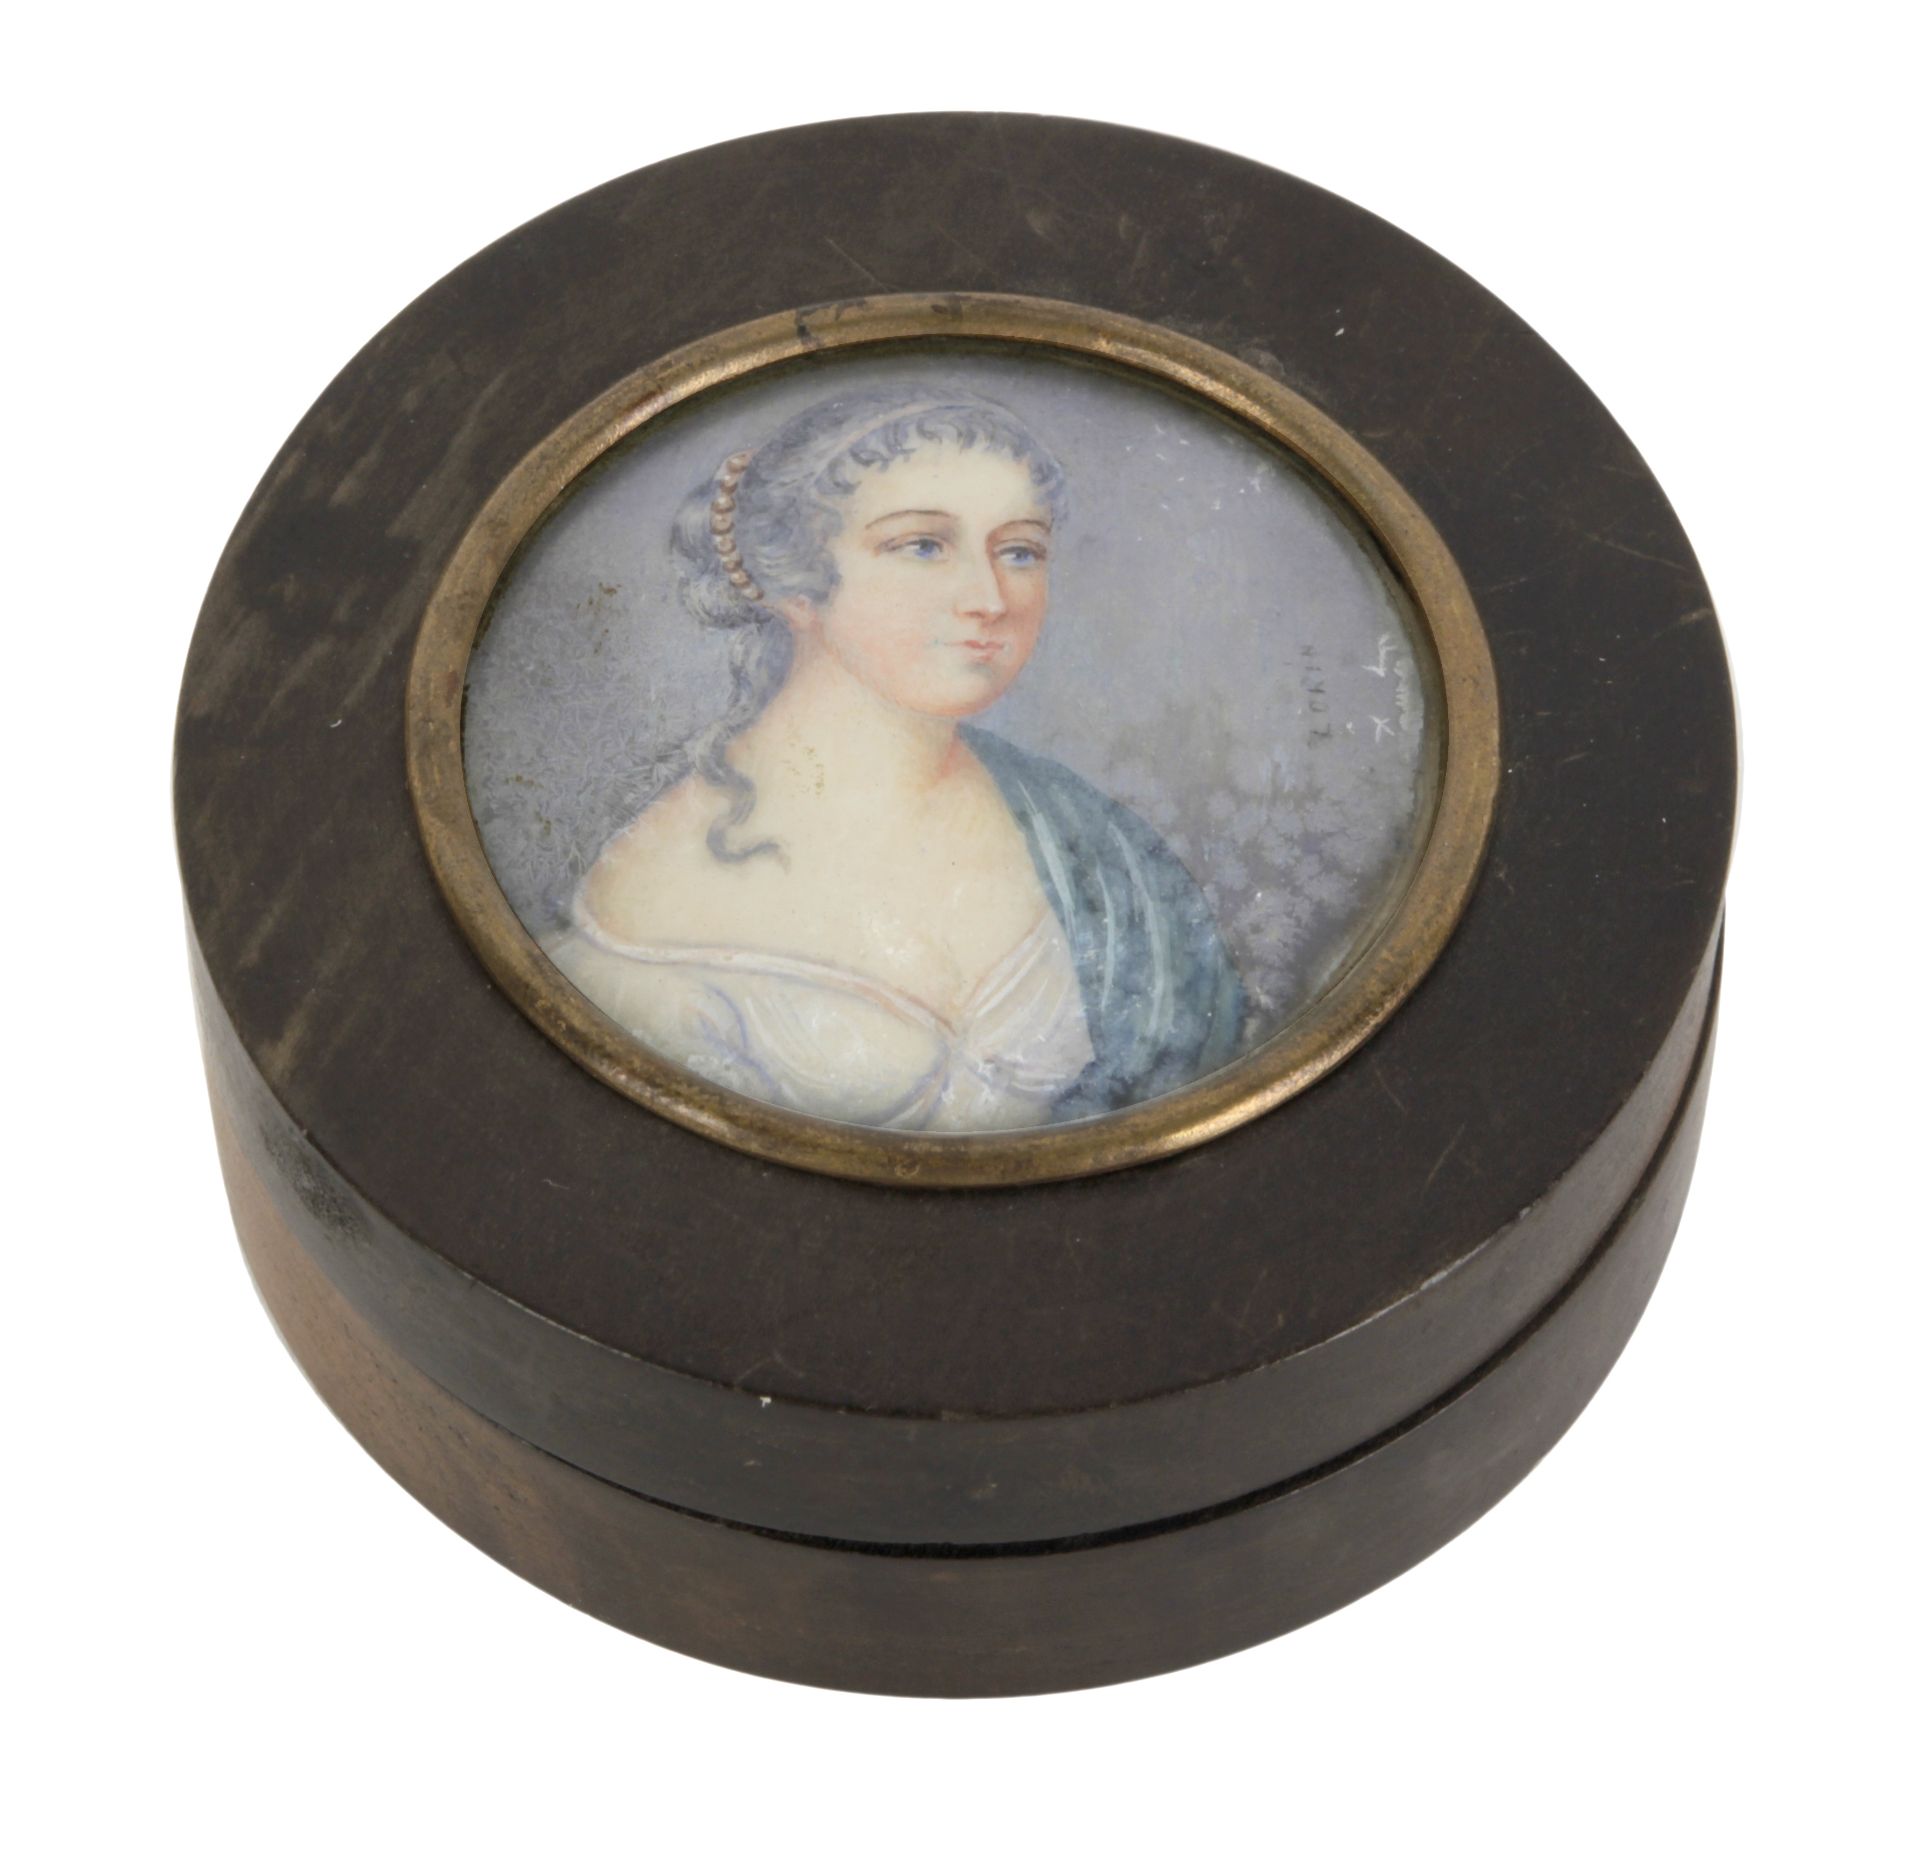 A 19th century snuff box in carved olive tree with a dame portrait miniature on the cover